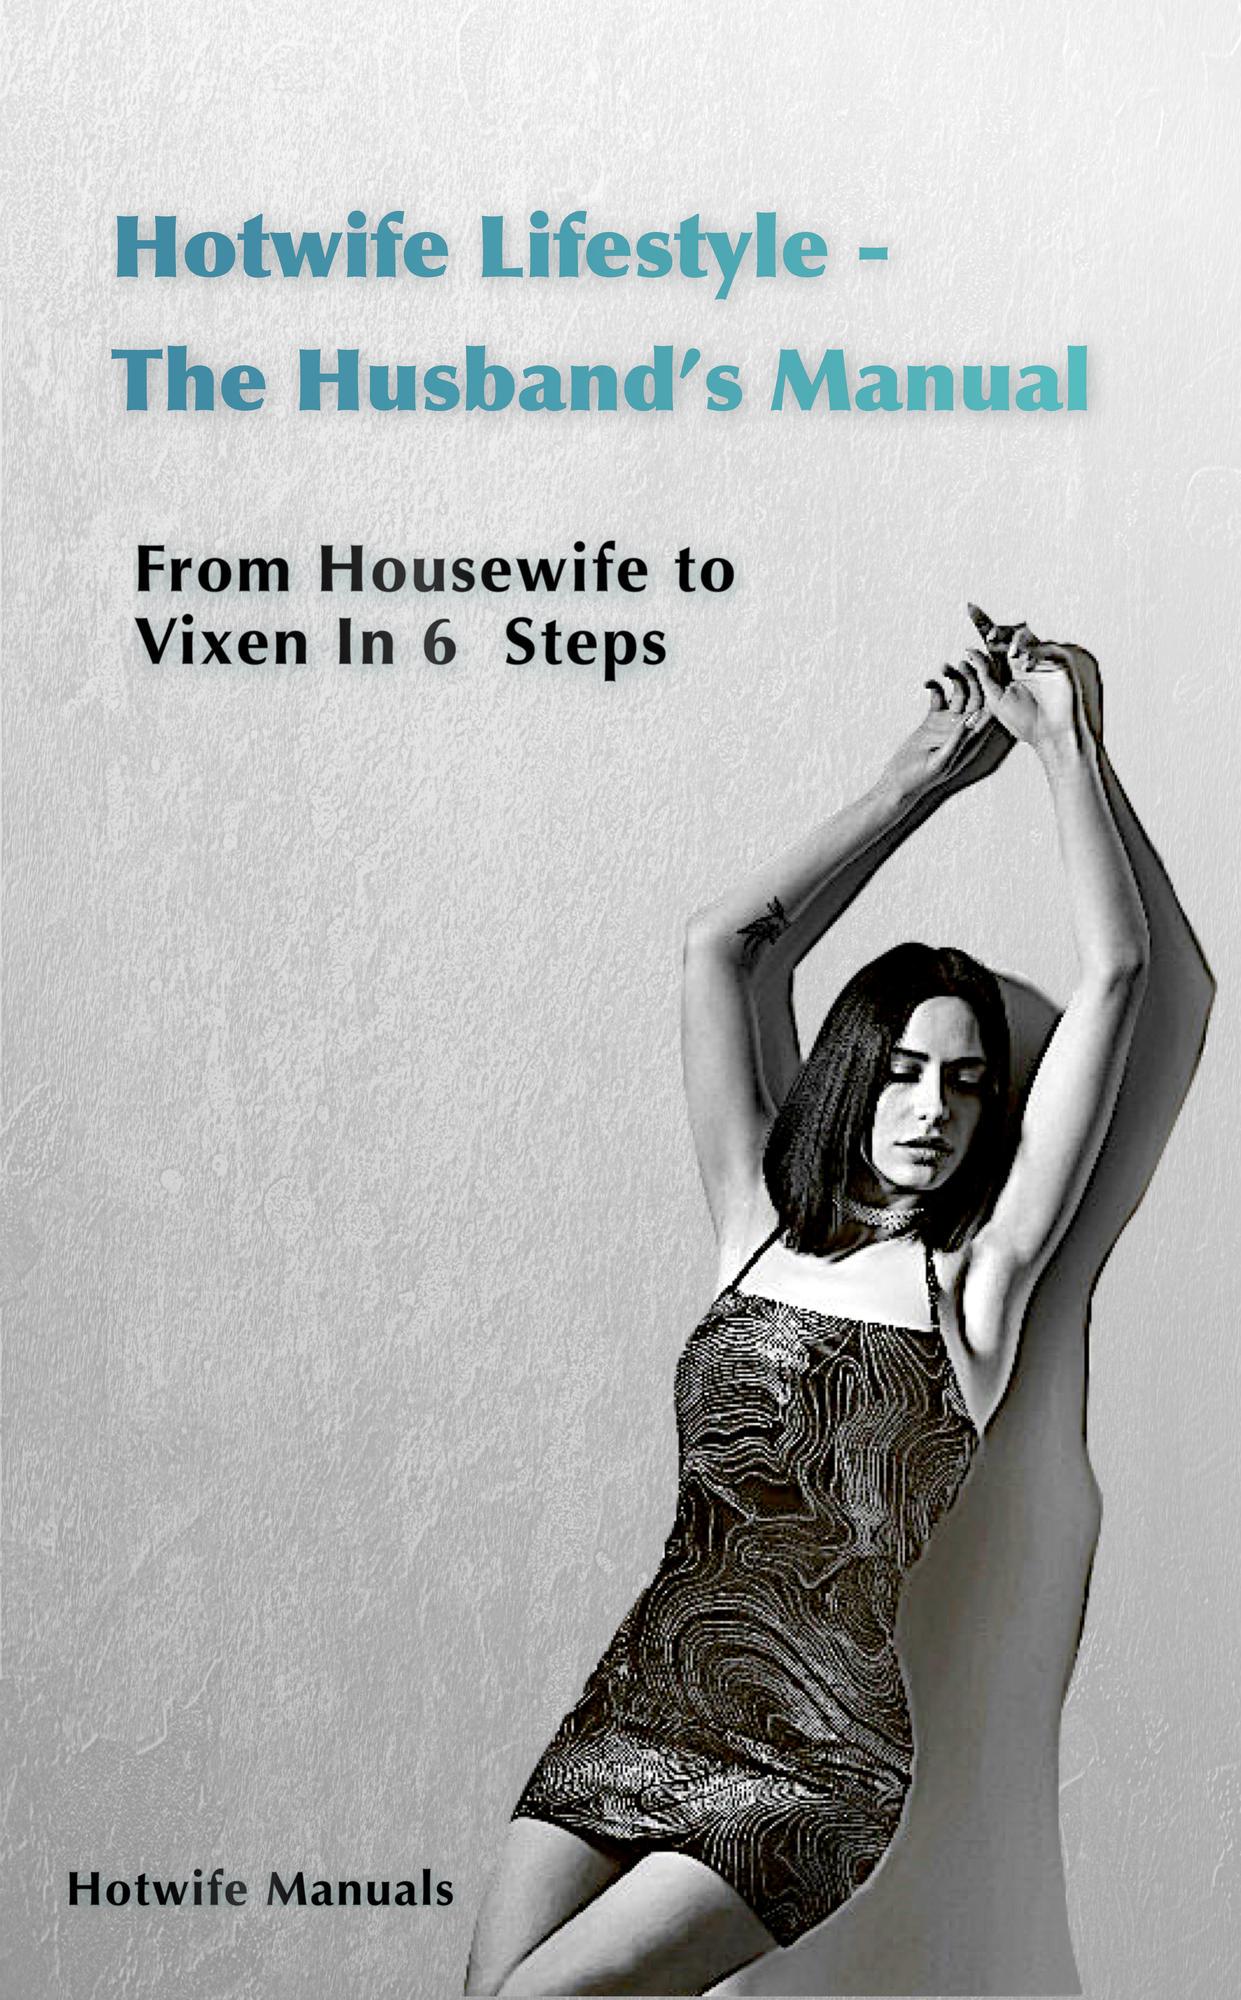 Smashwords Hotwife Guide The Husband S Manual Housewife To Vixen In 6 Steps A Book By